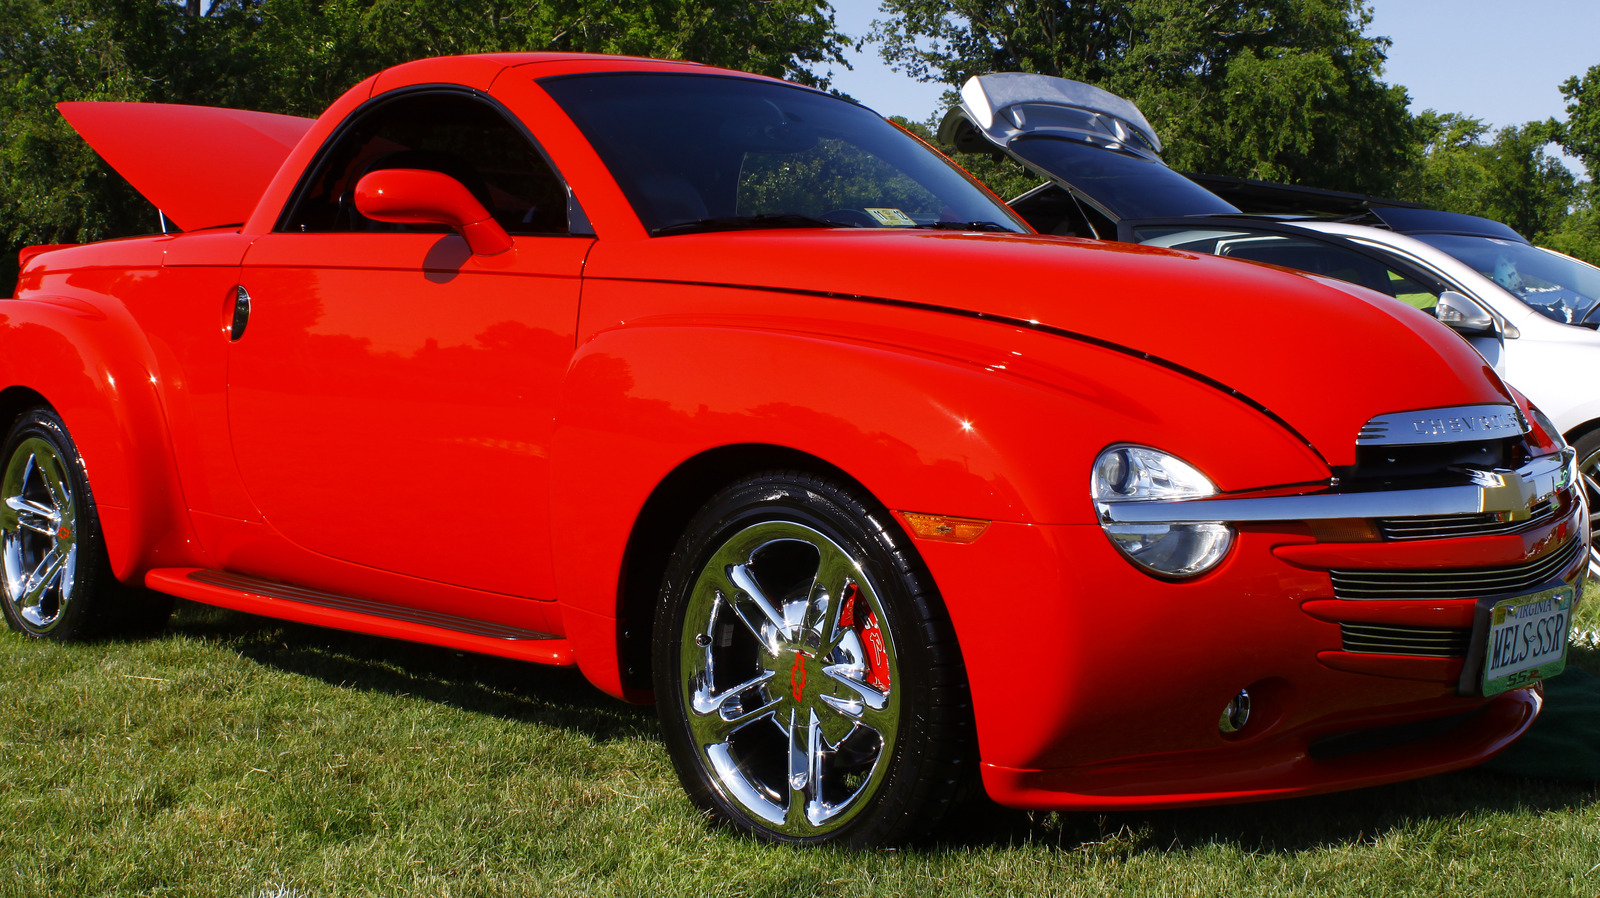 The Reason The Chevy SSR Convertible Truck Was A Failure